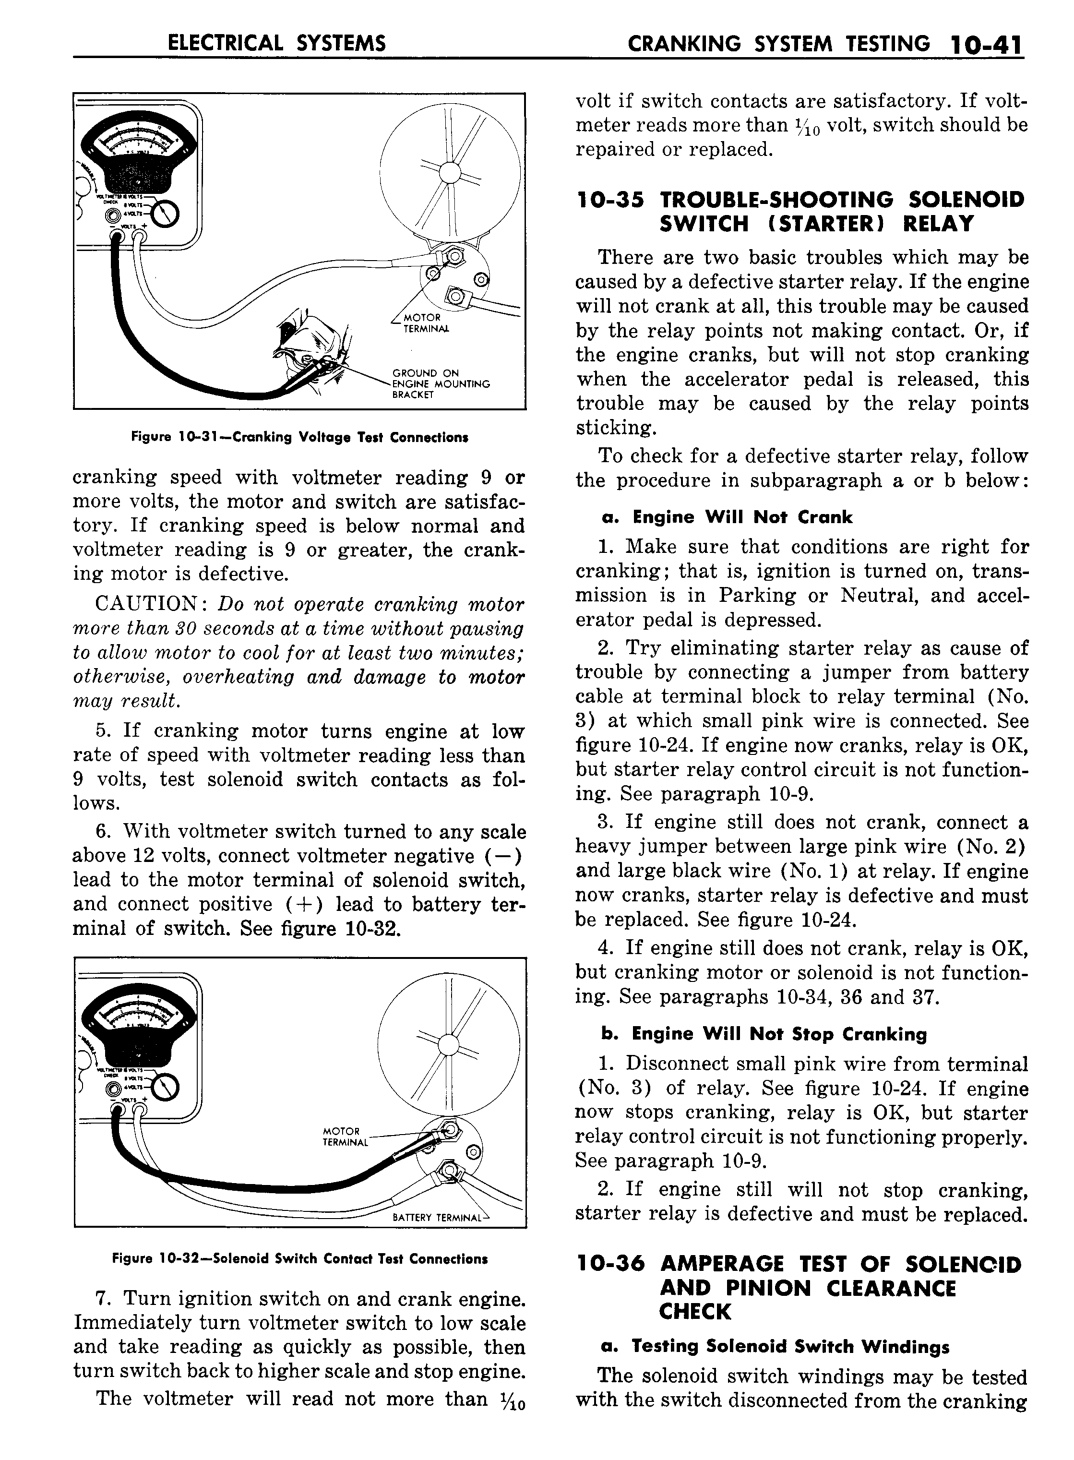 n_11 1957 Buick Shop Manual - Electrical Systems-041-041.jpg